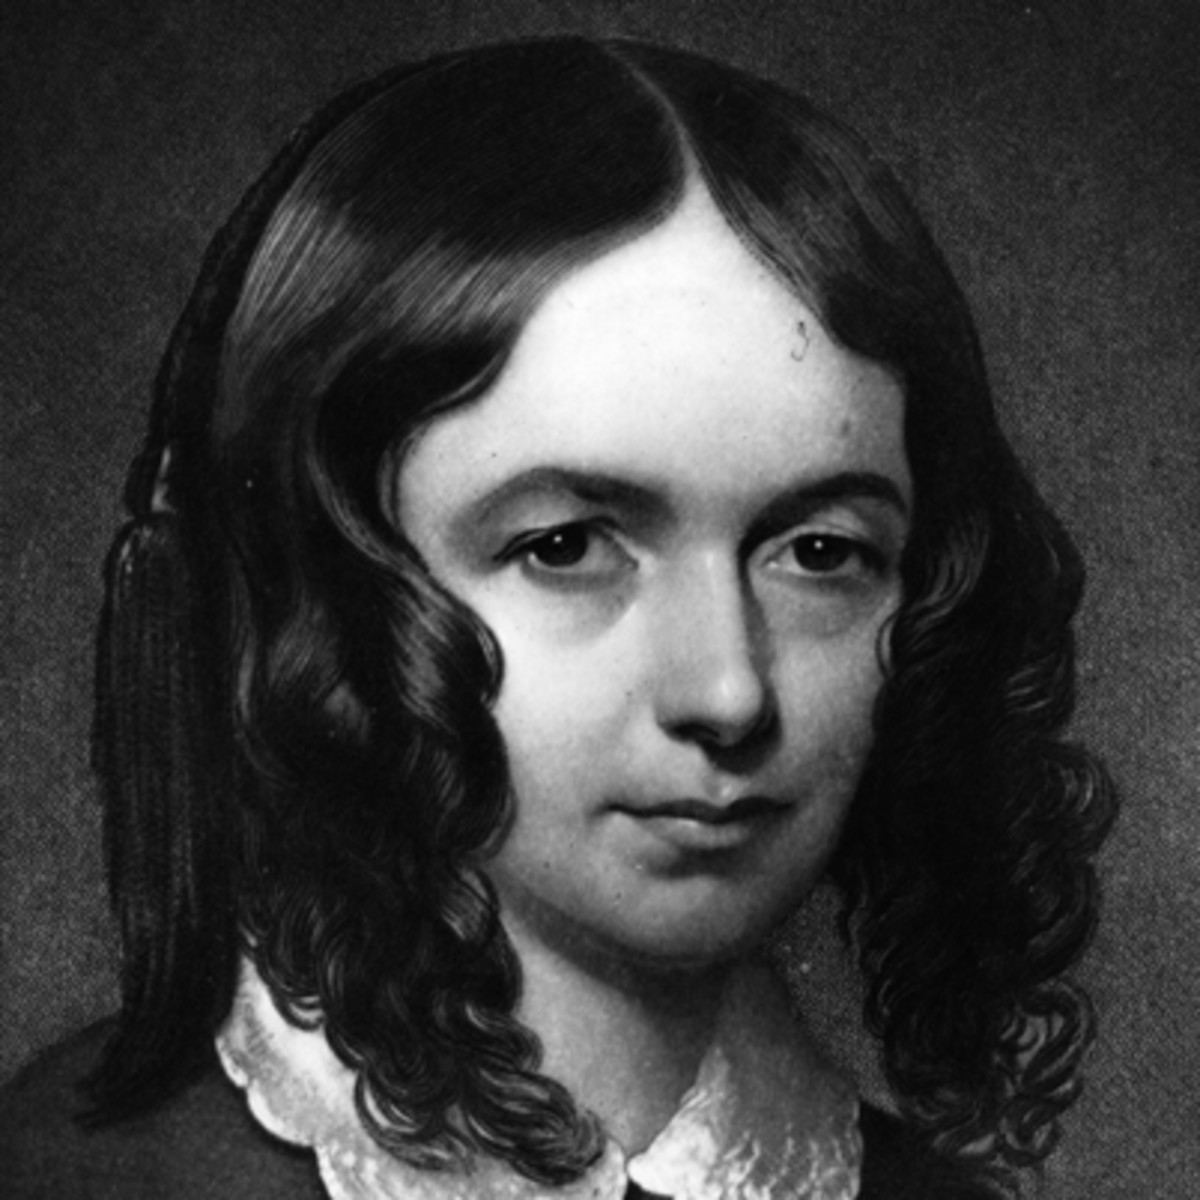 copy righted by irabotee.com,elizabeth barrett browning